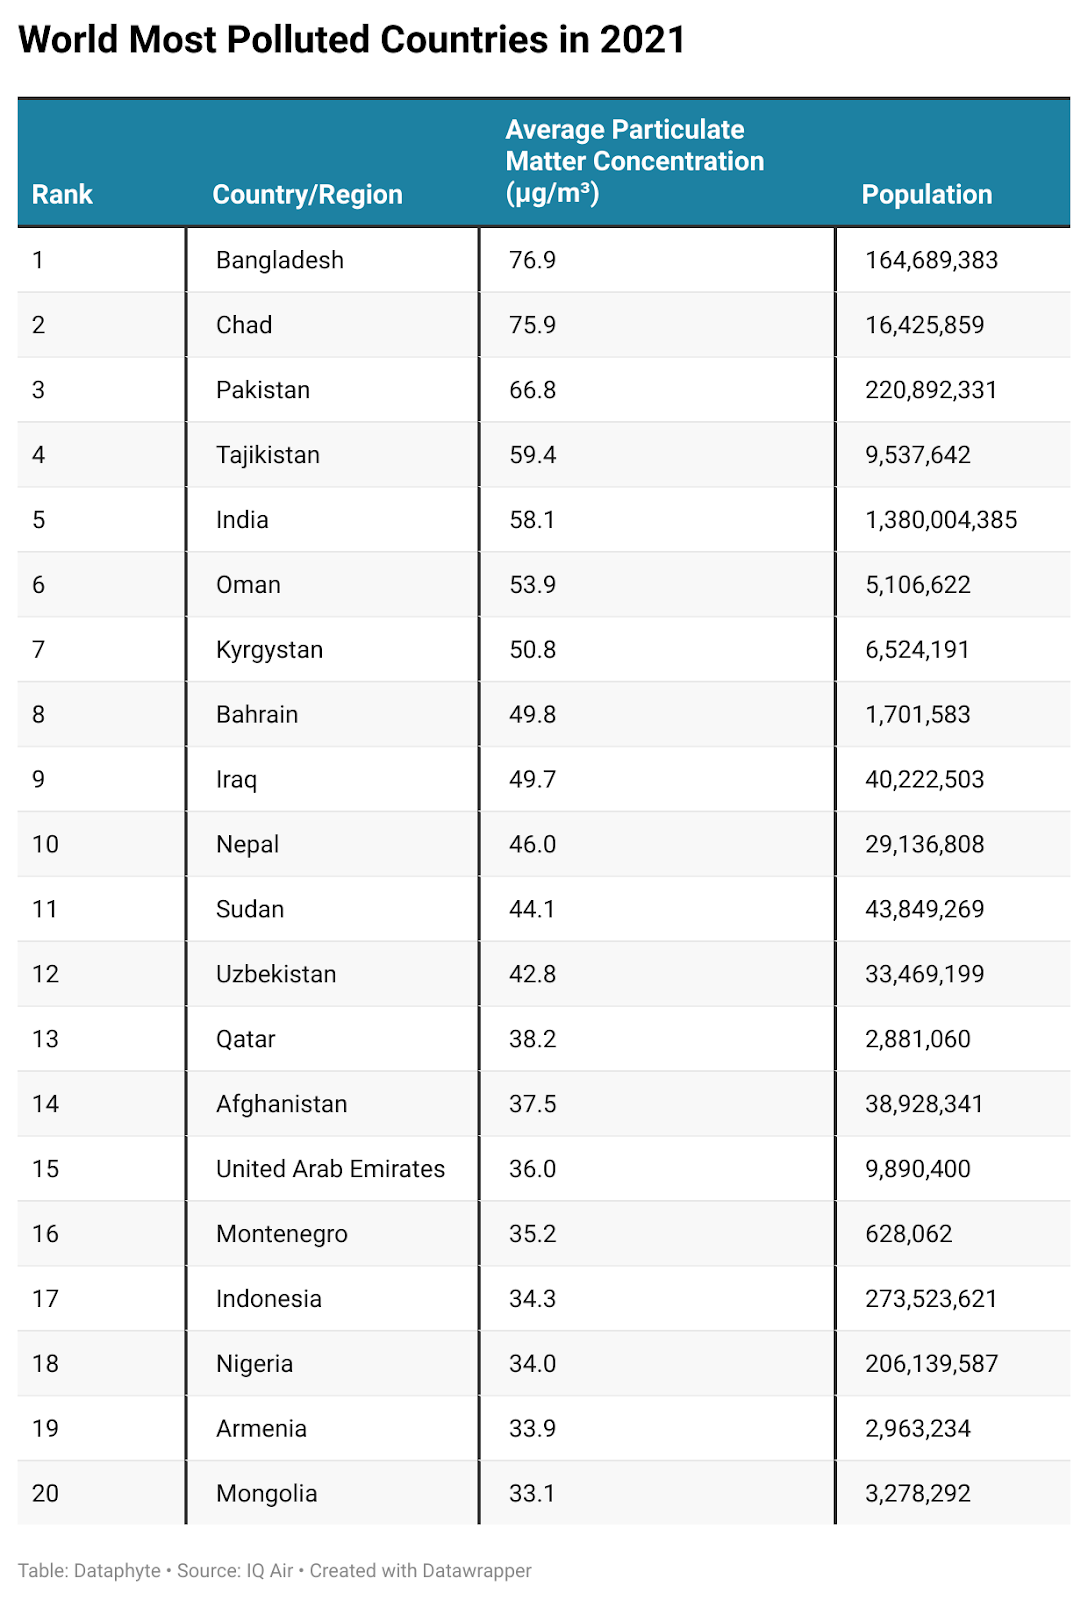 World most polluted countries in 2021